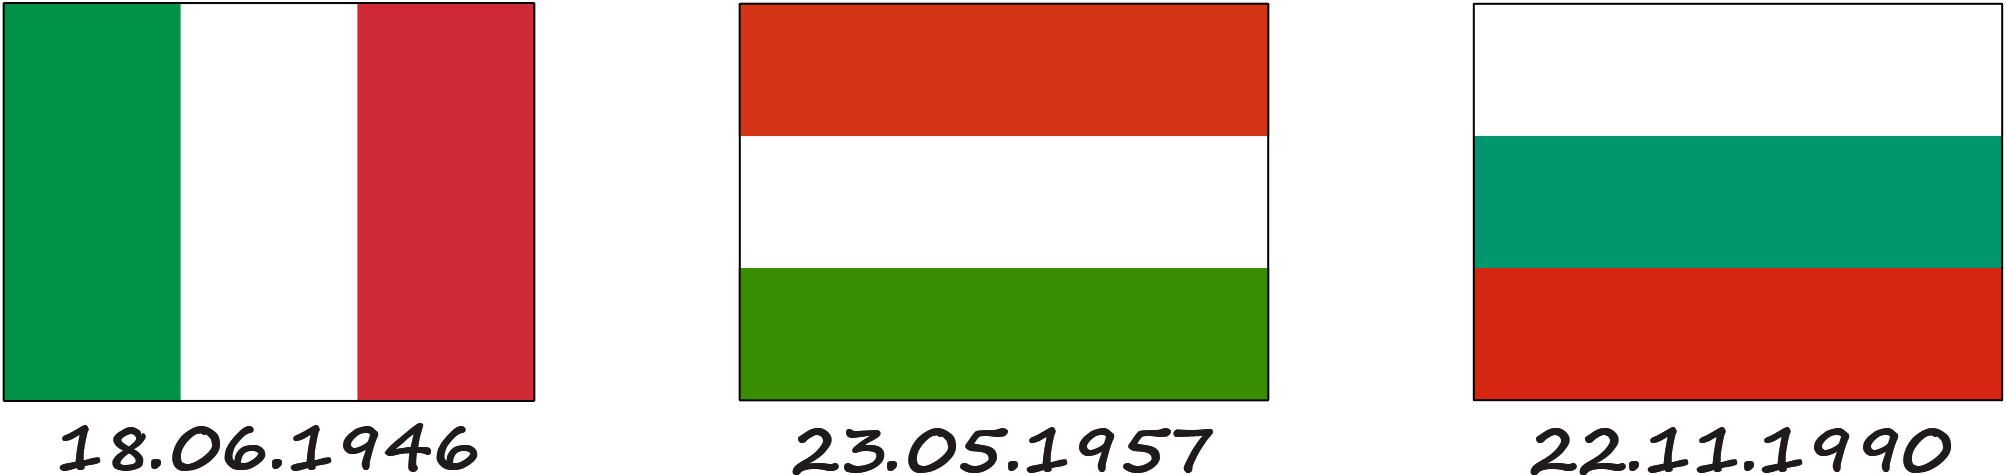 What flags is the Hungarian flag similar to?